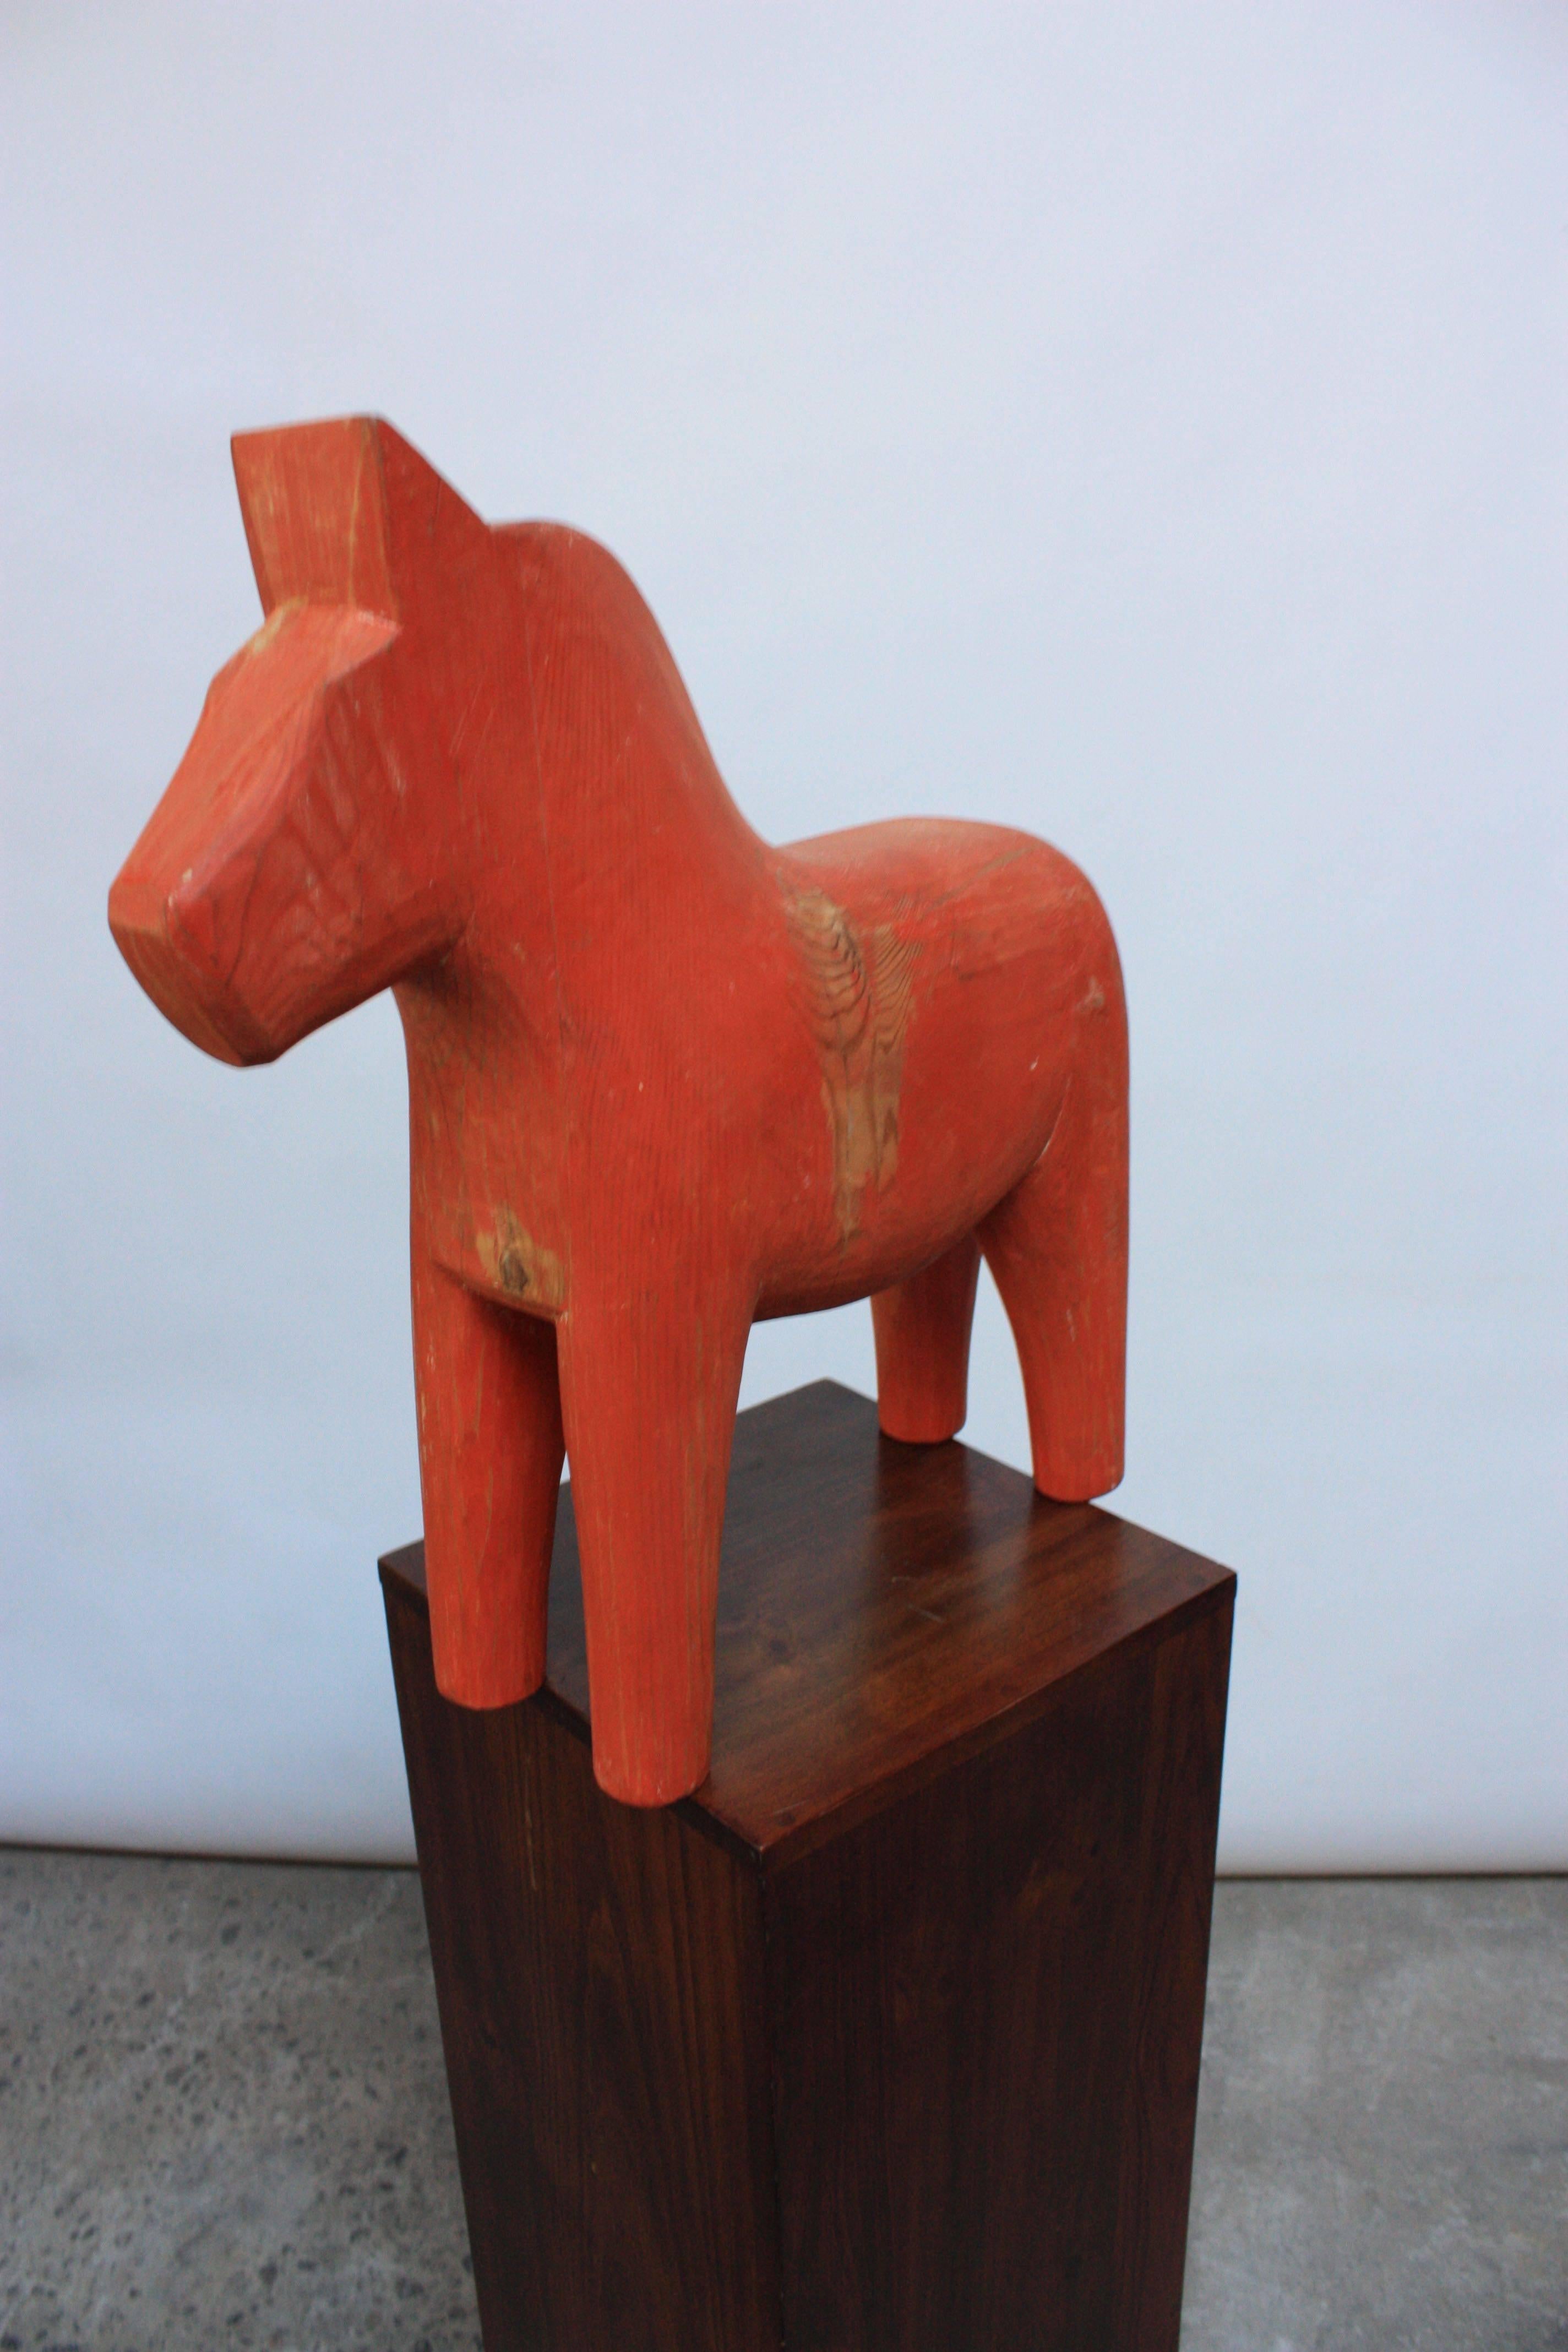 This Dala horse is an unusual example given both its size and appearance. It measures 19.25